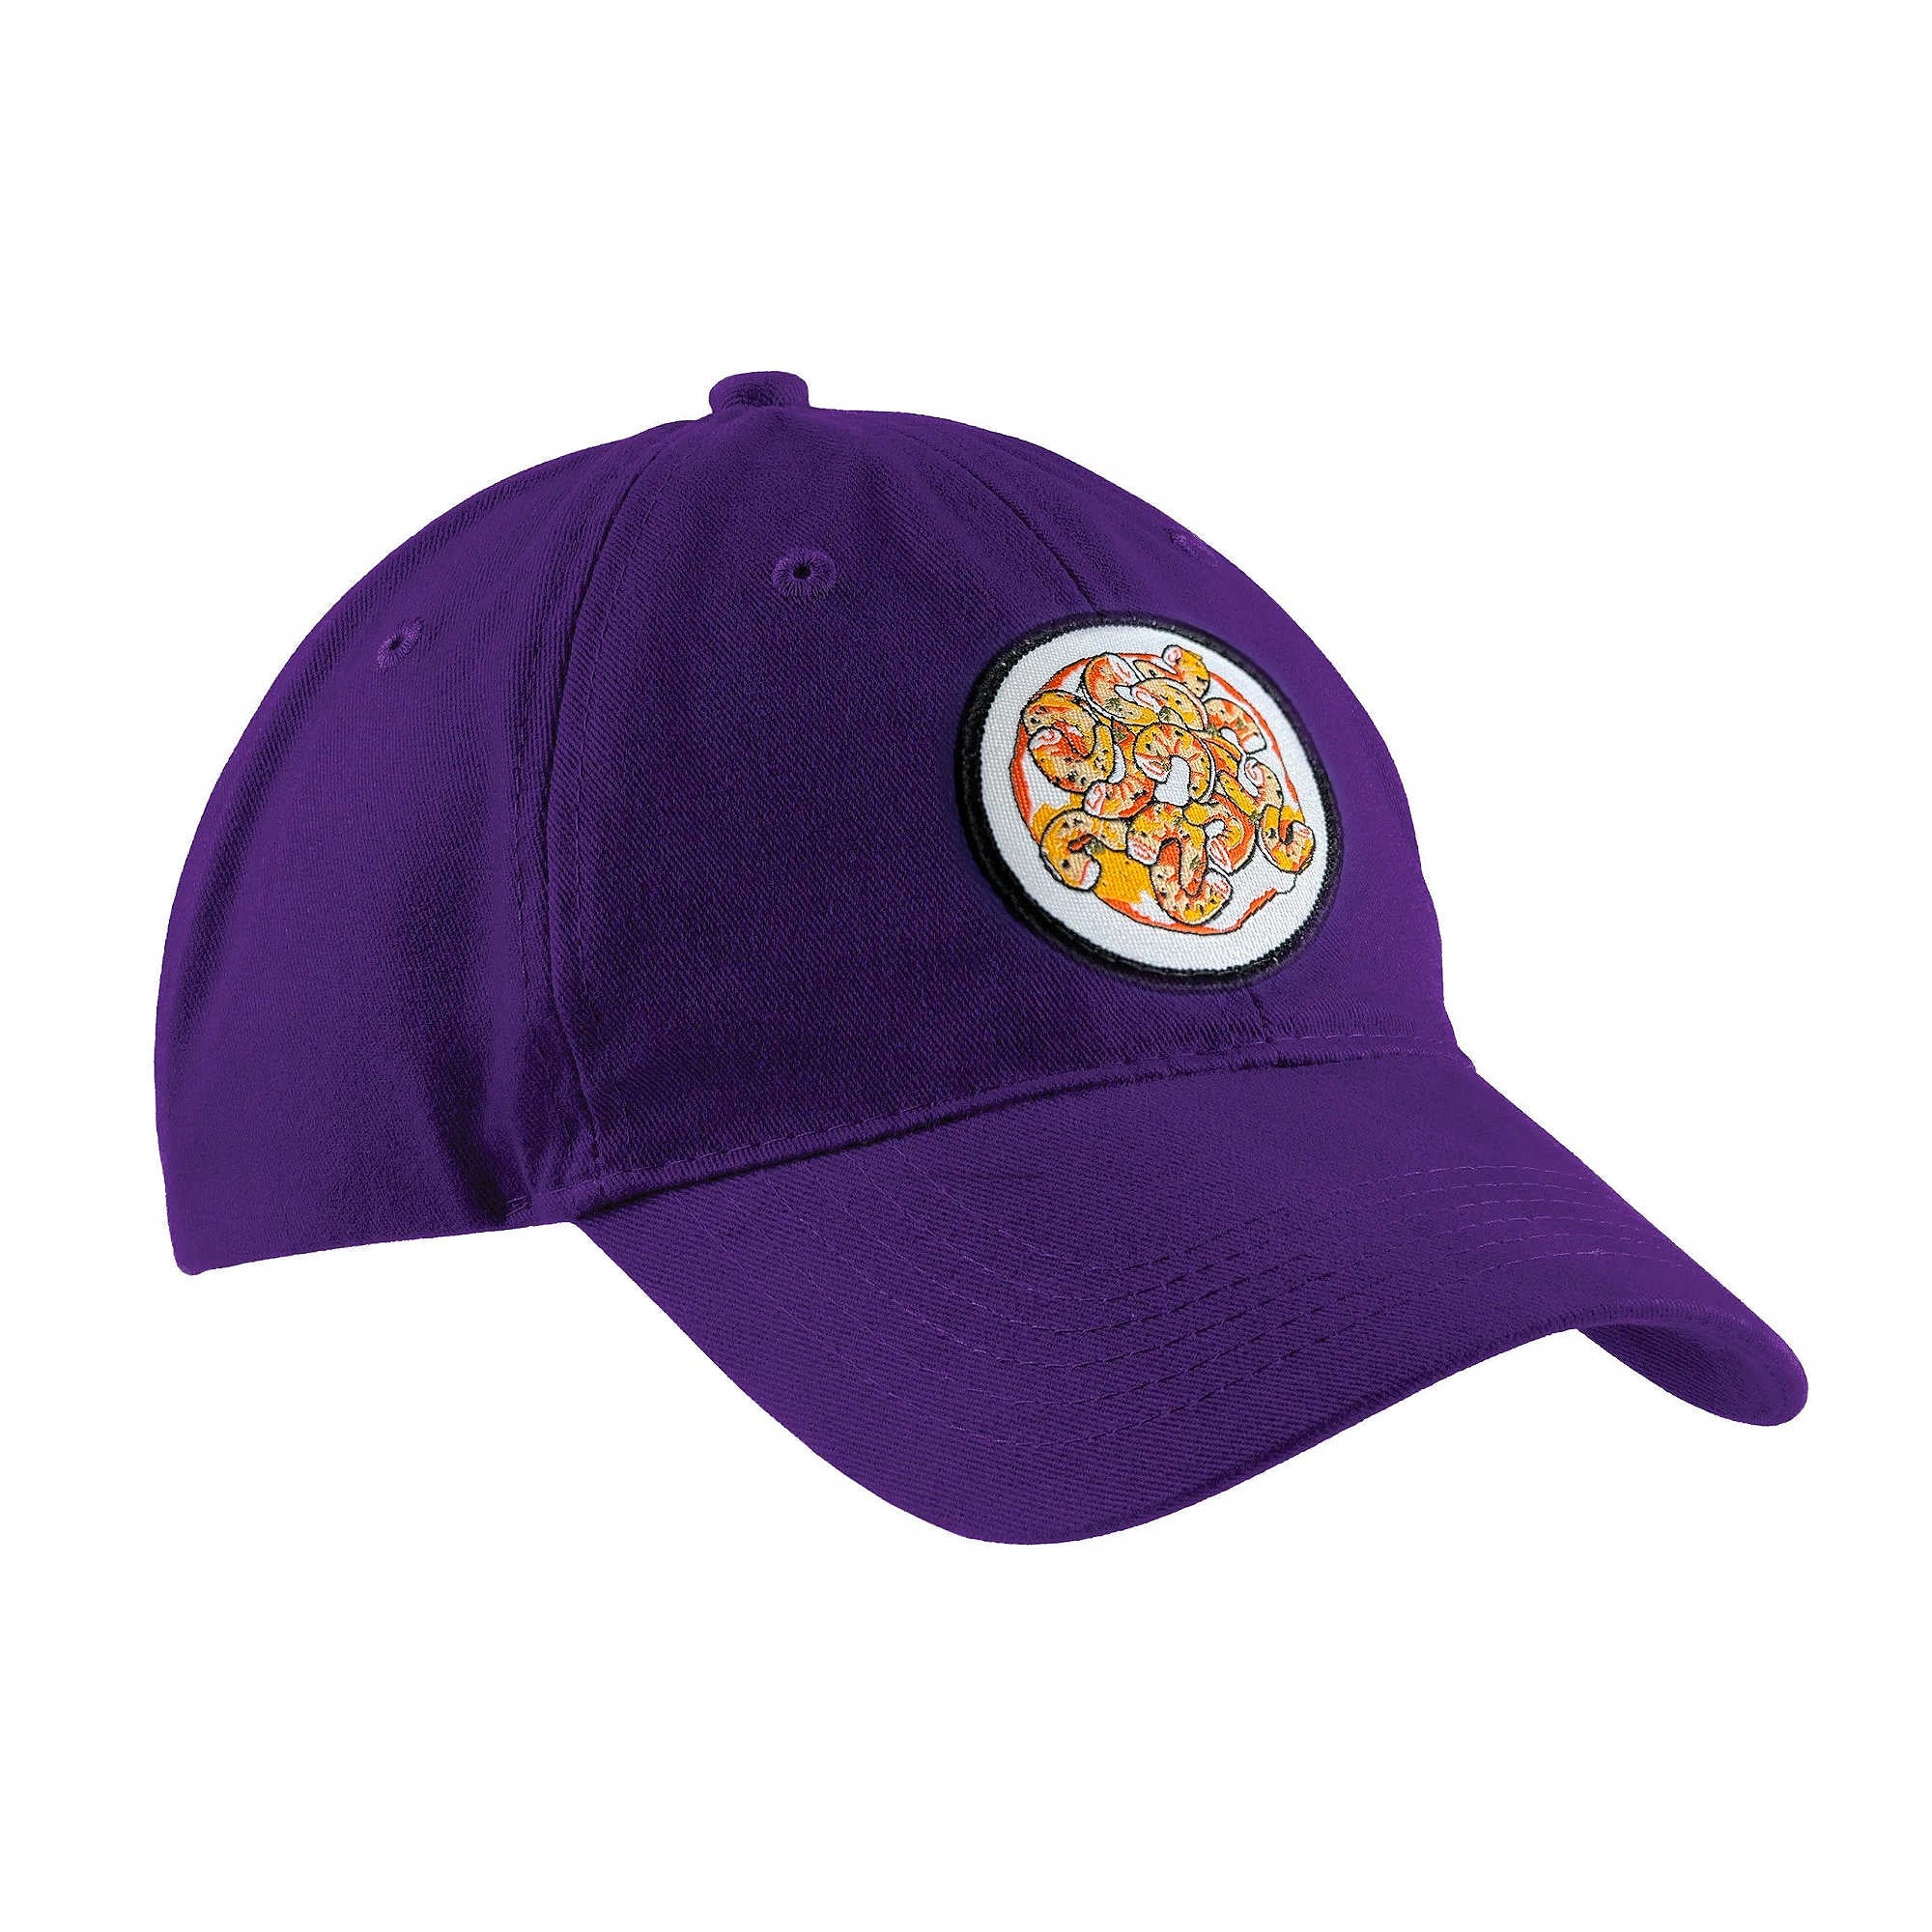 Shrimp N' Grits Relaxed Hat